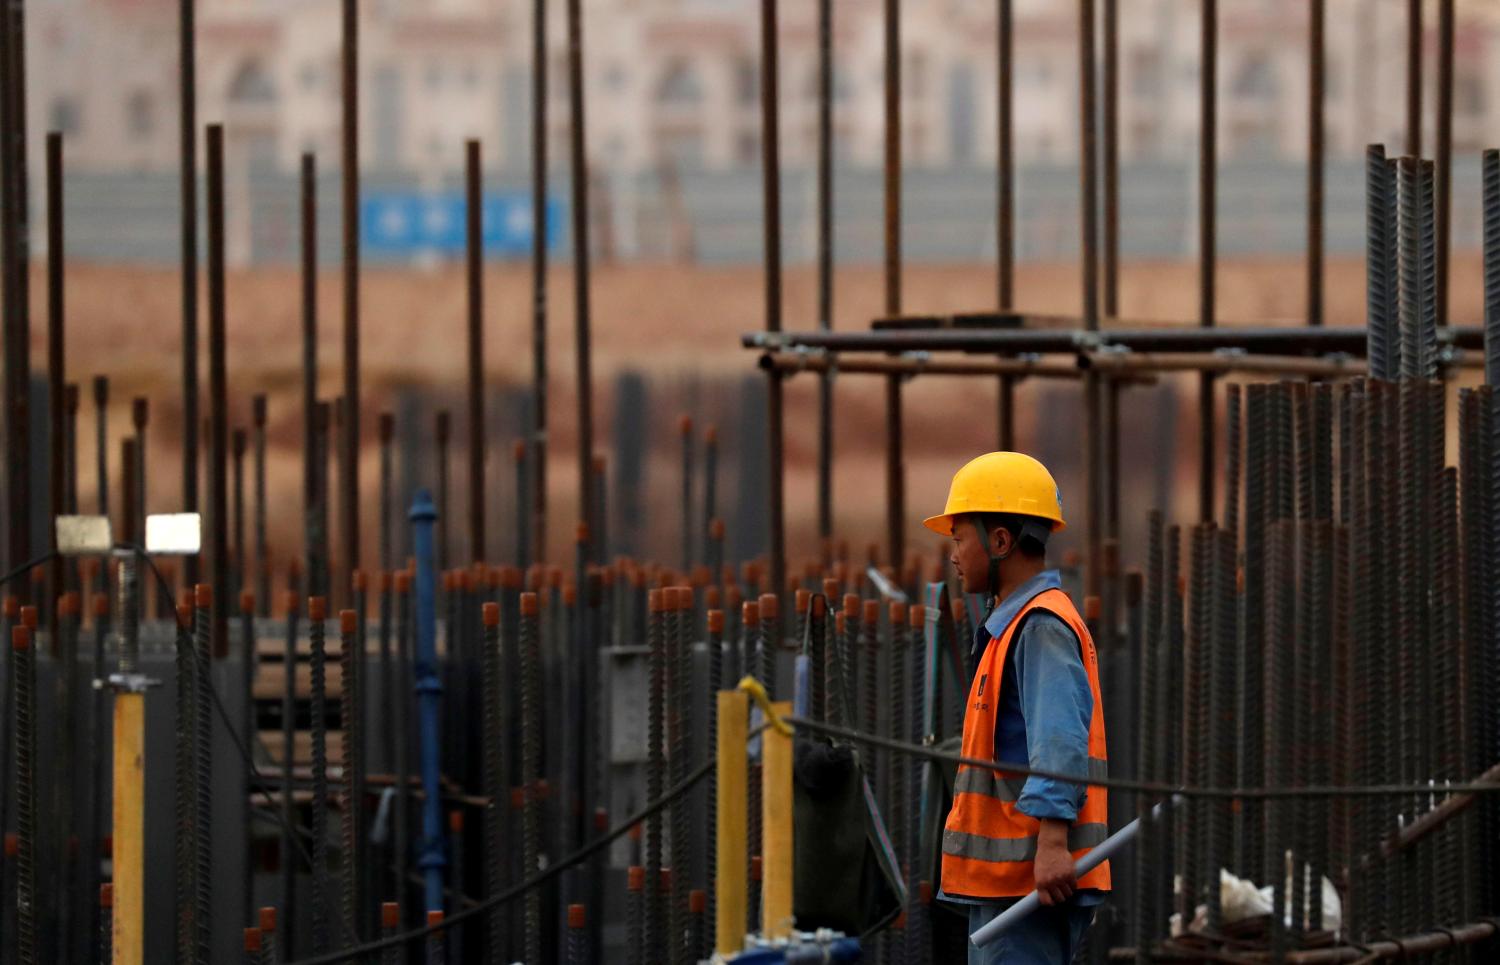 A Chinese construction labourer works at the site of the future Iconic Tower skyscraper, at its foundations in the business district, being built by China State Construction Engineering Corp (CSCEC) in the New Administrative Capital (NAC) east of Cairo, Egypt May 2, 2019. Picture taken May 2, 2019. REUTERS/Amr Abdallah Dalsh - RC143E9C90F0